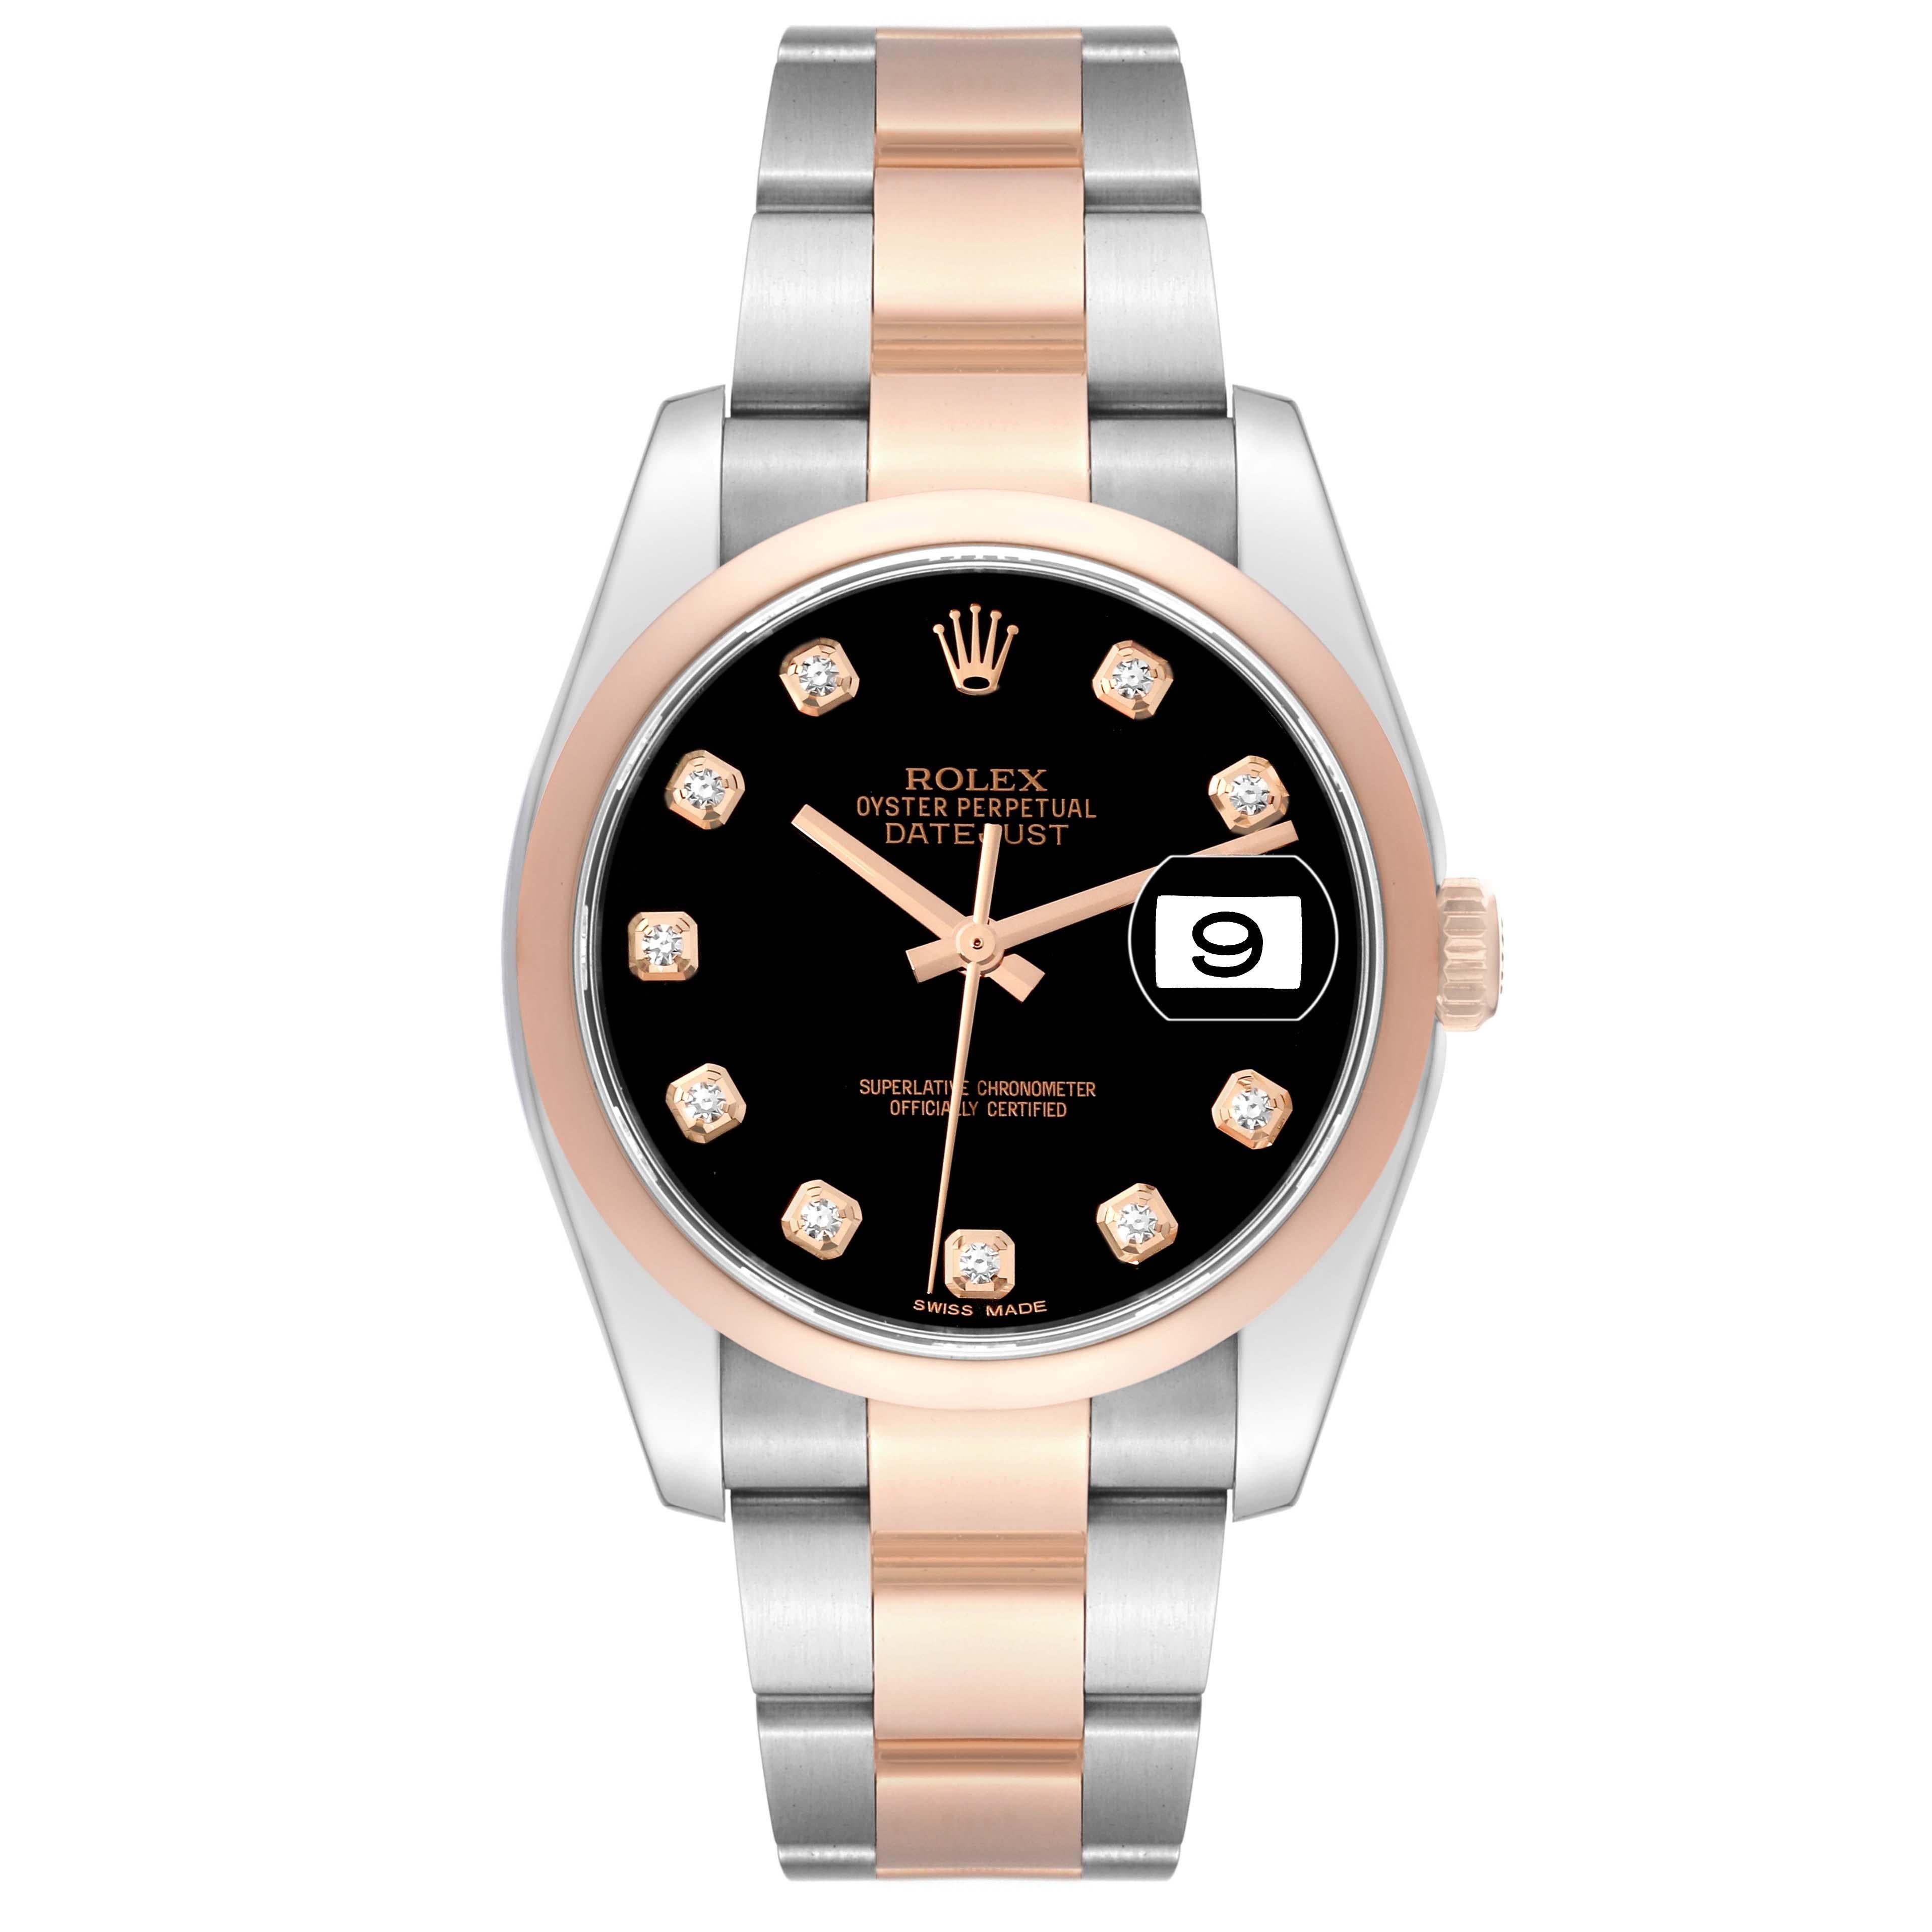 Rolex Datejust 36 Steel Rose Gold Black Diamond Dial Mens Watch 116201 For Sale 7